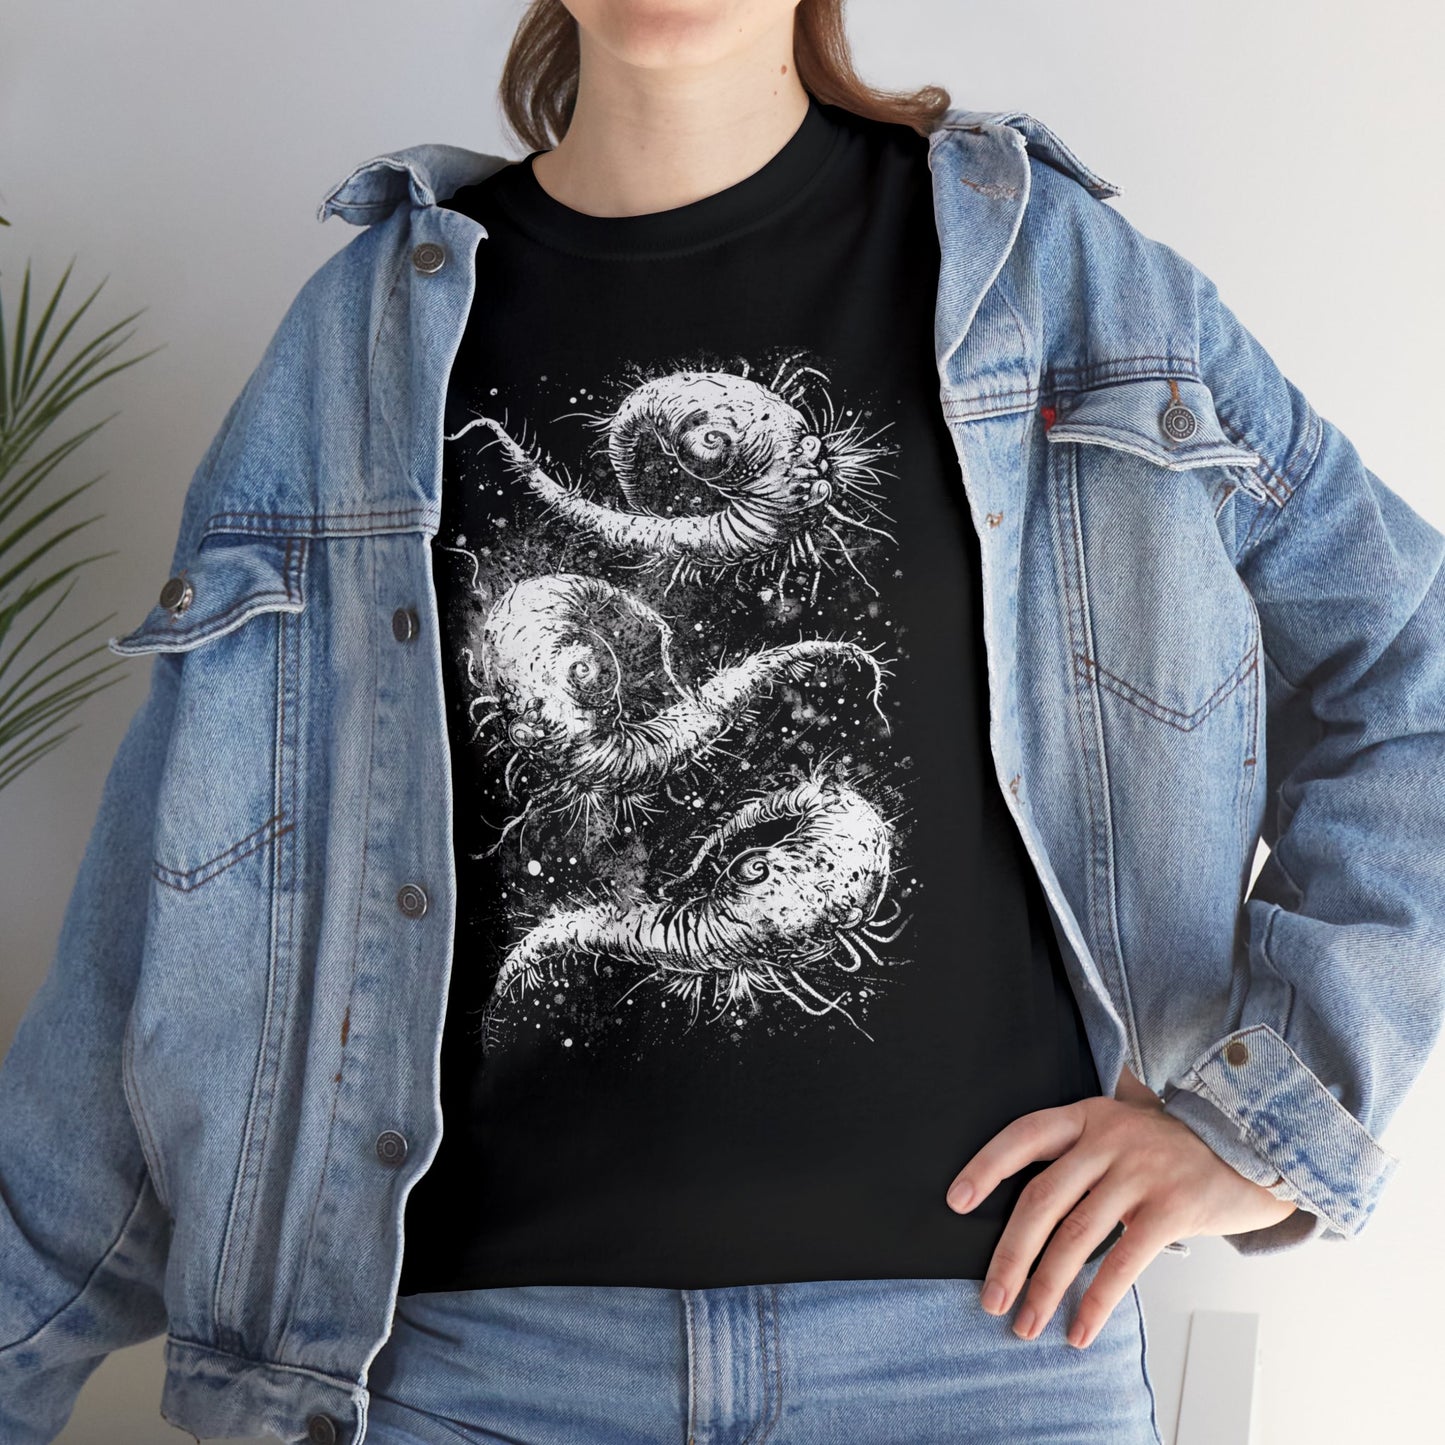 Unisex T-shirt Cosmic Worms in White - Frogos Design